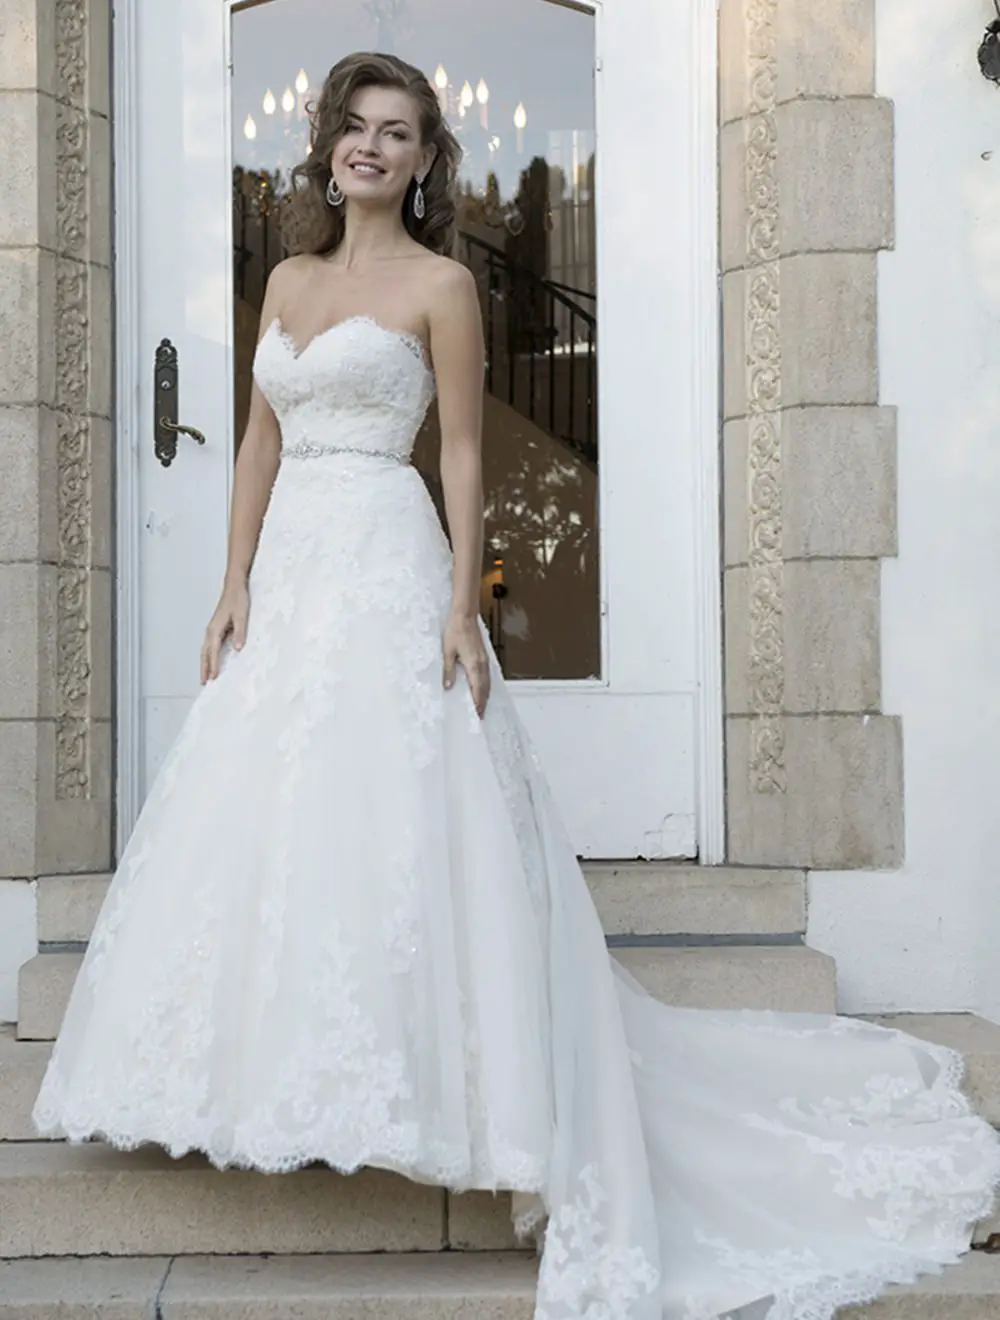 Sweetheart Neckline A line Wedding Gown With Beading ...